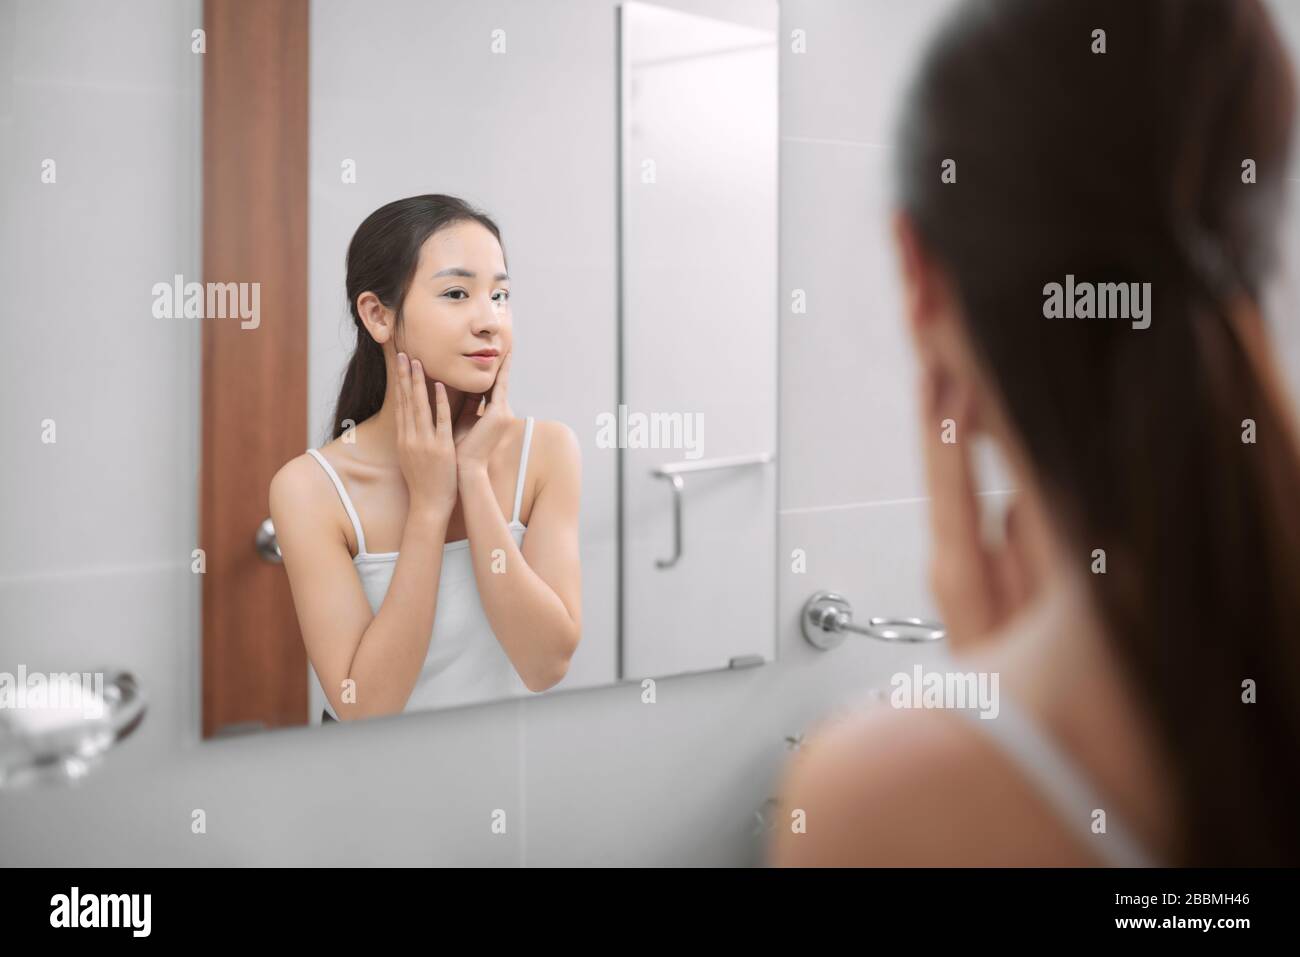 Beauty in mirror reflection. Over the shoulder view of beautiful woman touching her face while looking in the mirror Stock Photo